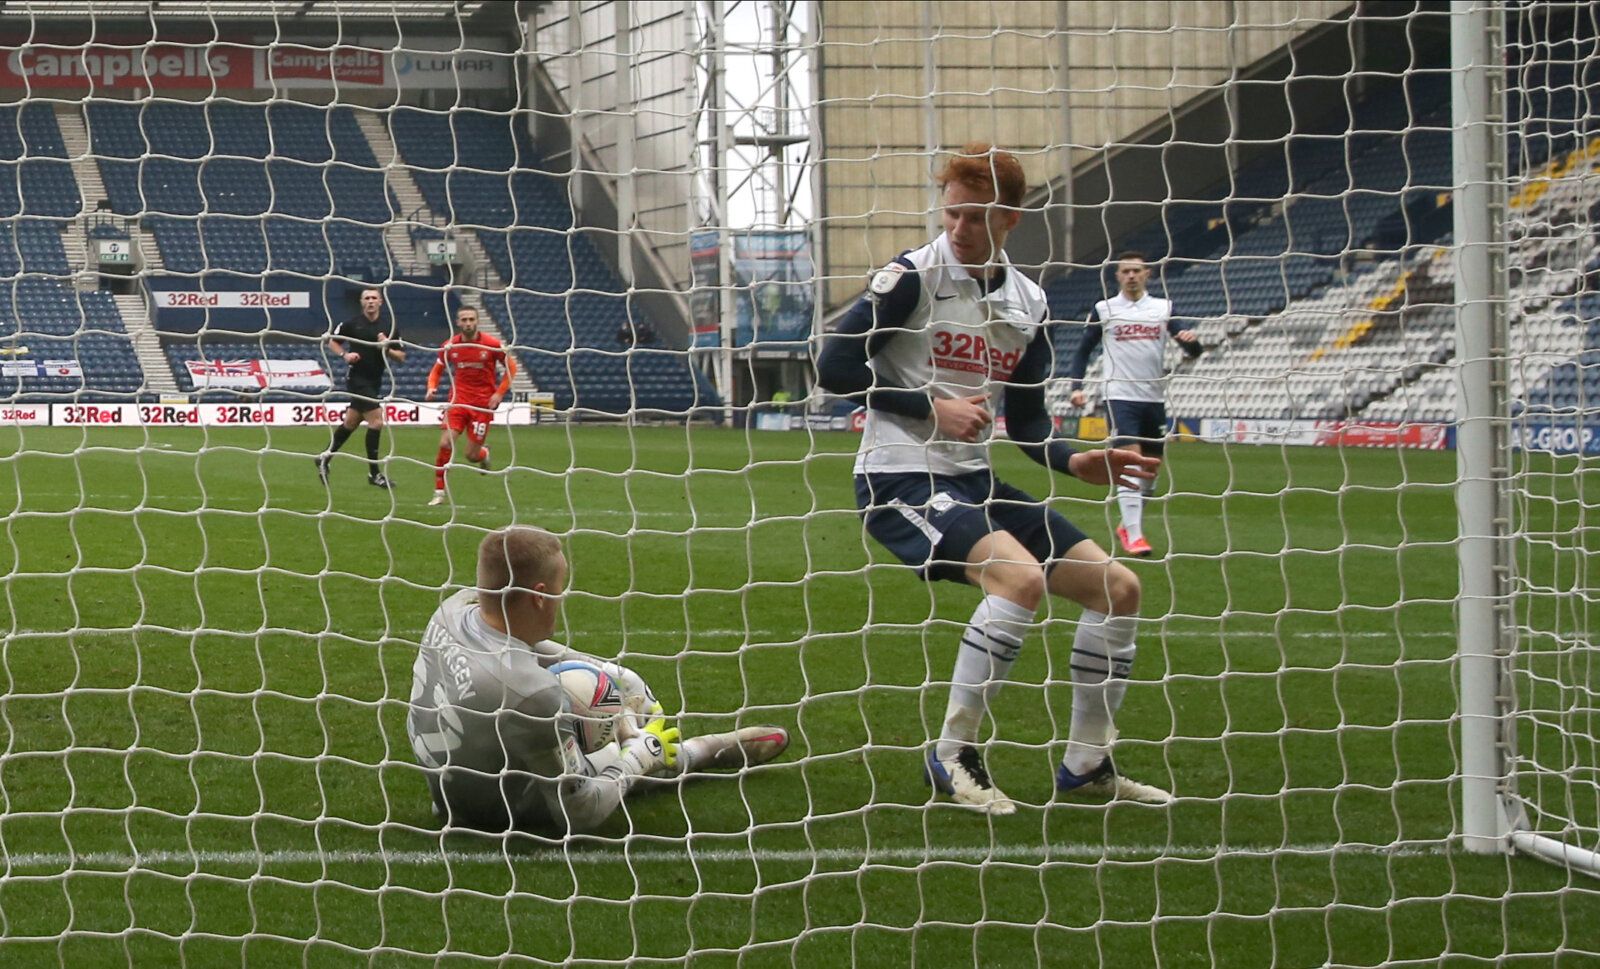 Soccer Football - Championship - Preston North End v Luton Town - Deepdale, Preston, Britain - March 20, 2021 Preston North End's Daniel Iversen scores an own goal and Luton Town's first Action Images/Jason Cairnduff EDITORIAL USE ONLY. No use with unauthorized audio, video, data, fixture lists, club/league logos or 'live' services. Online in-match use limited to 75 images, no video emulation. No use in betting, games or single club /league/player publications.  Please contact your account repre